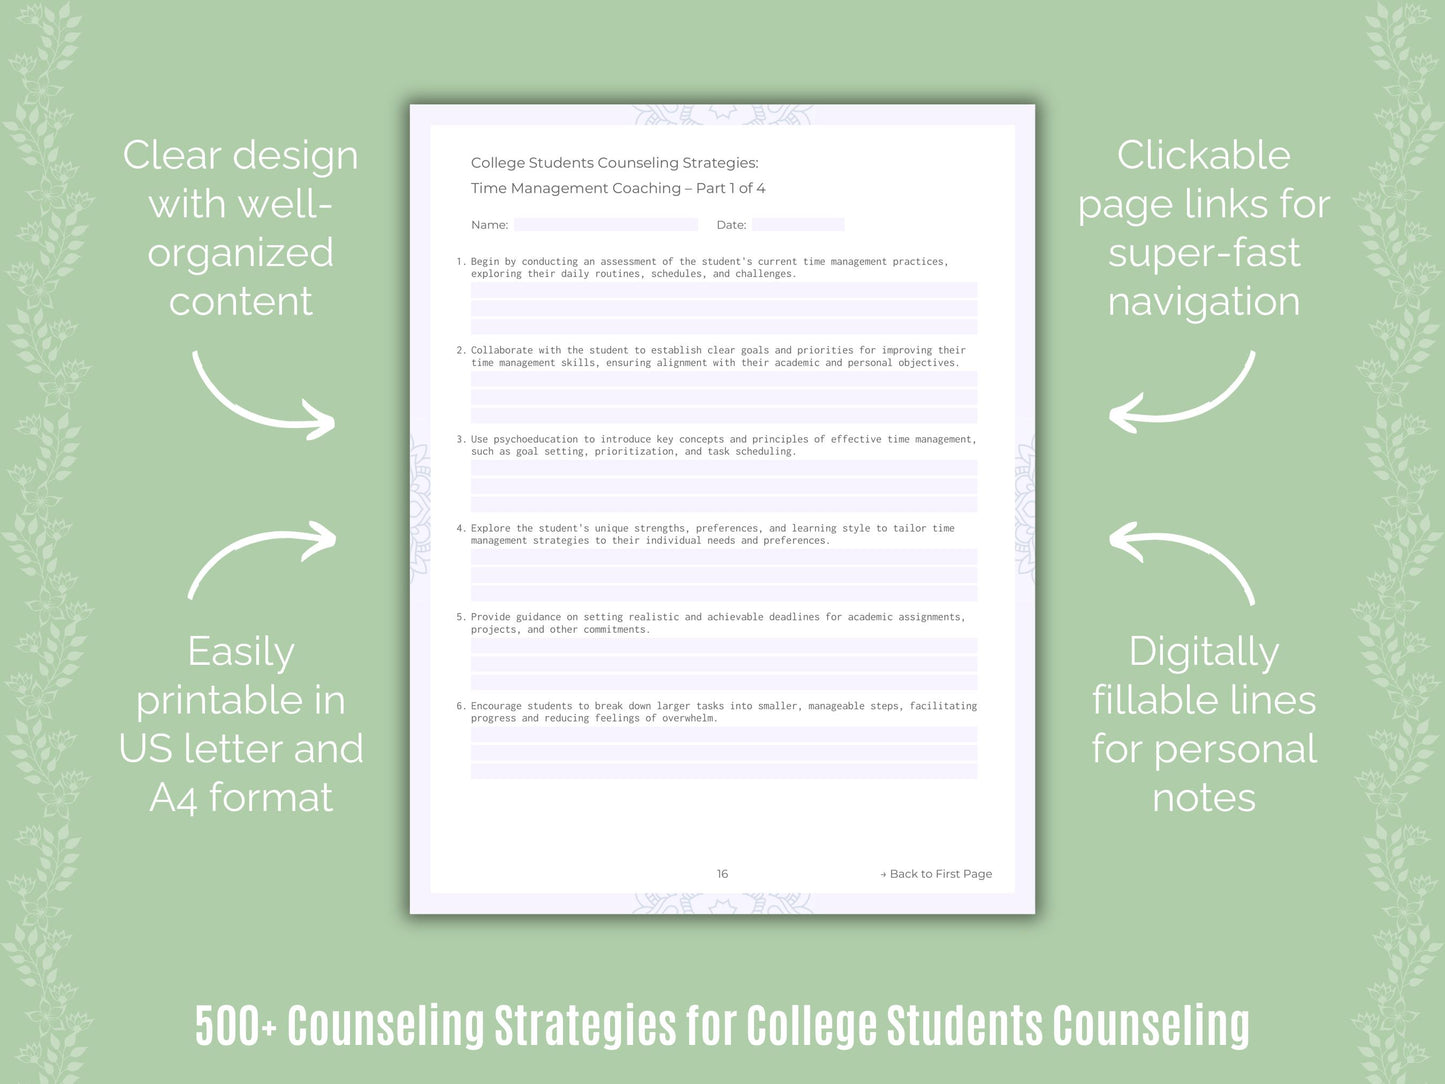 College Students Counseling Workbook